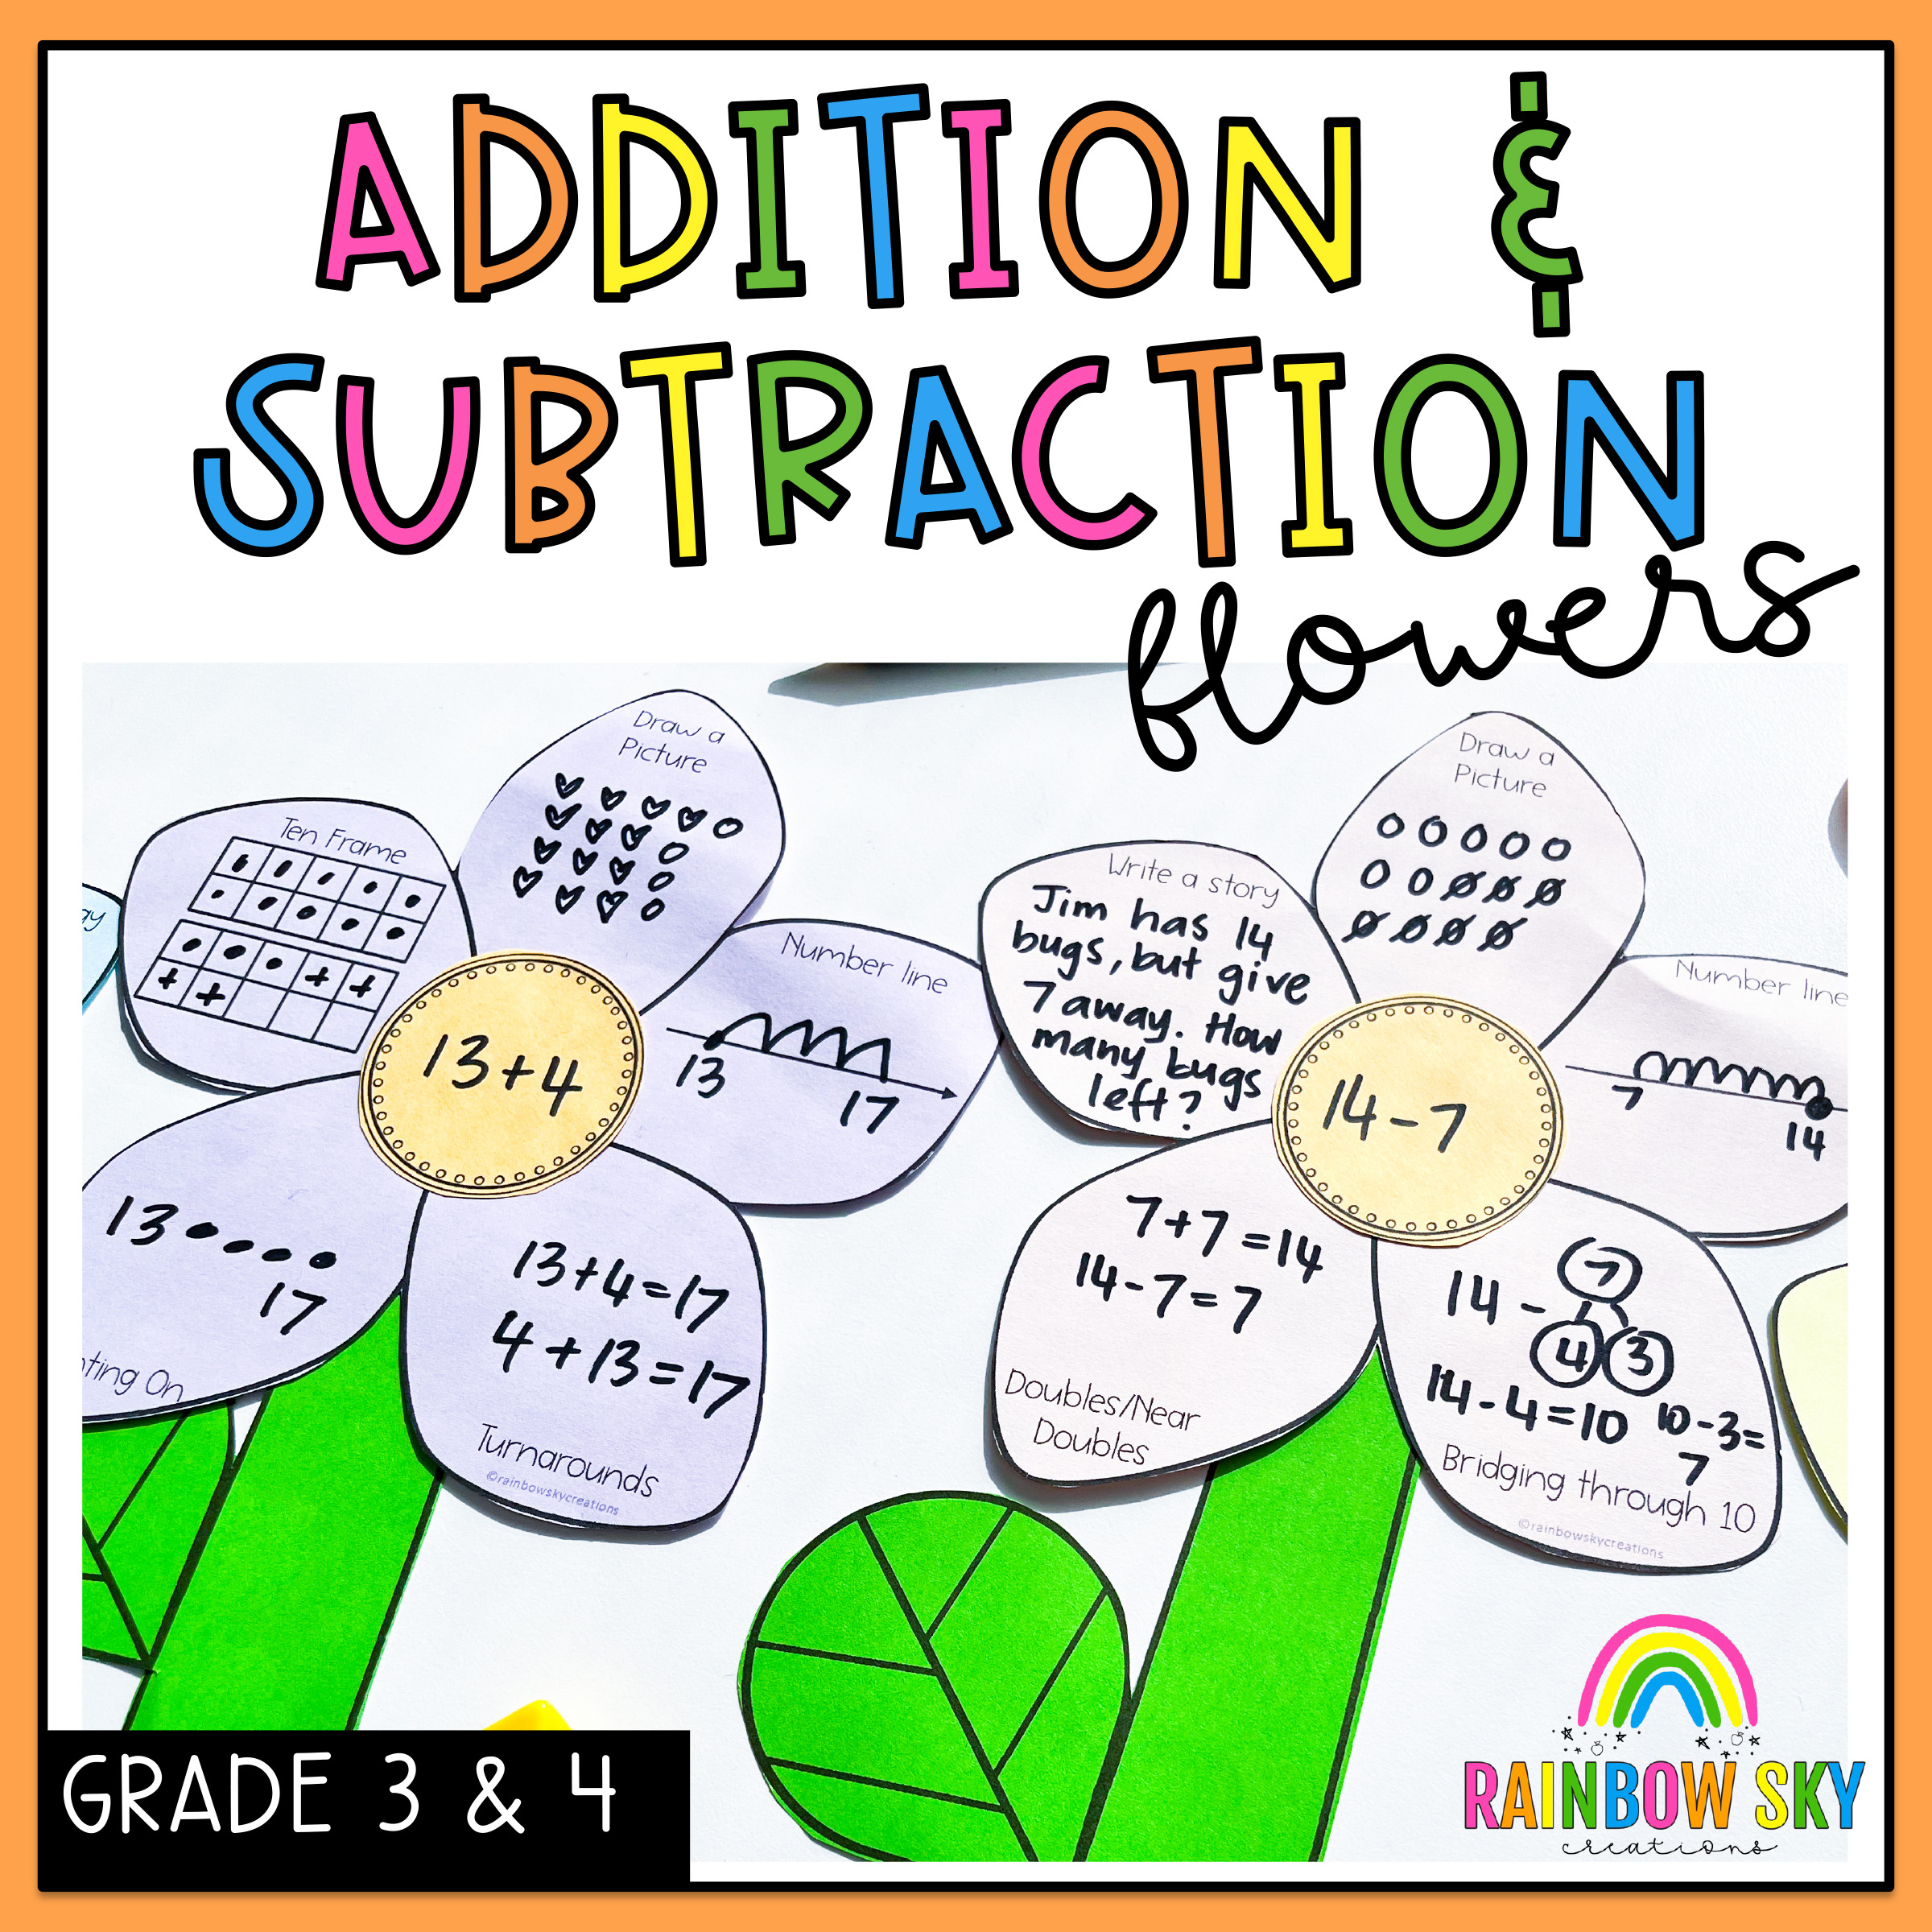 AdditionSubtractionFlowers